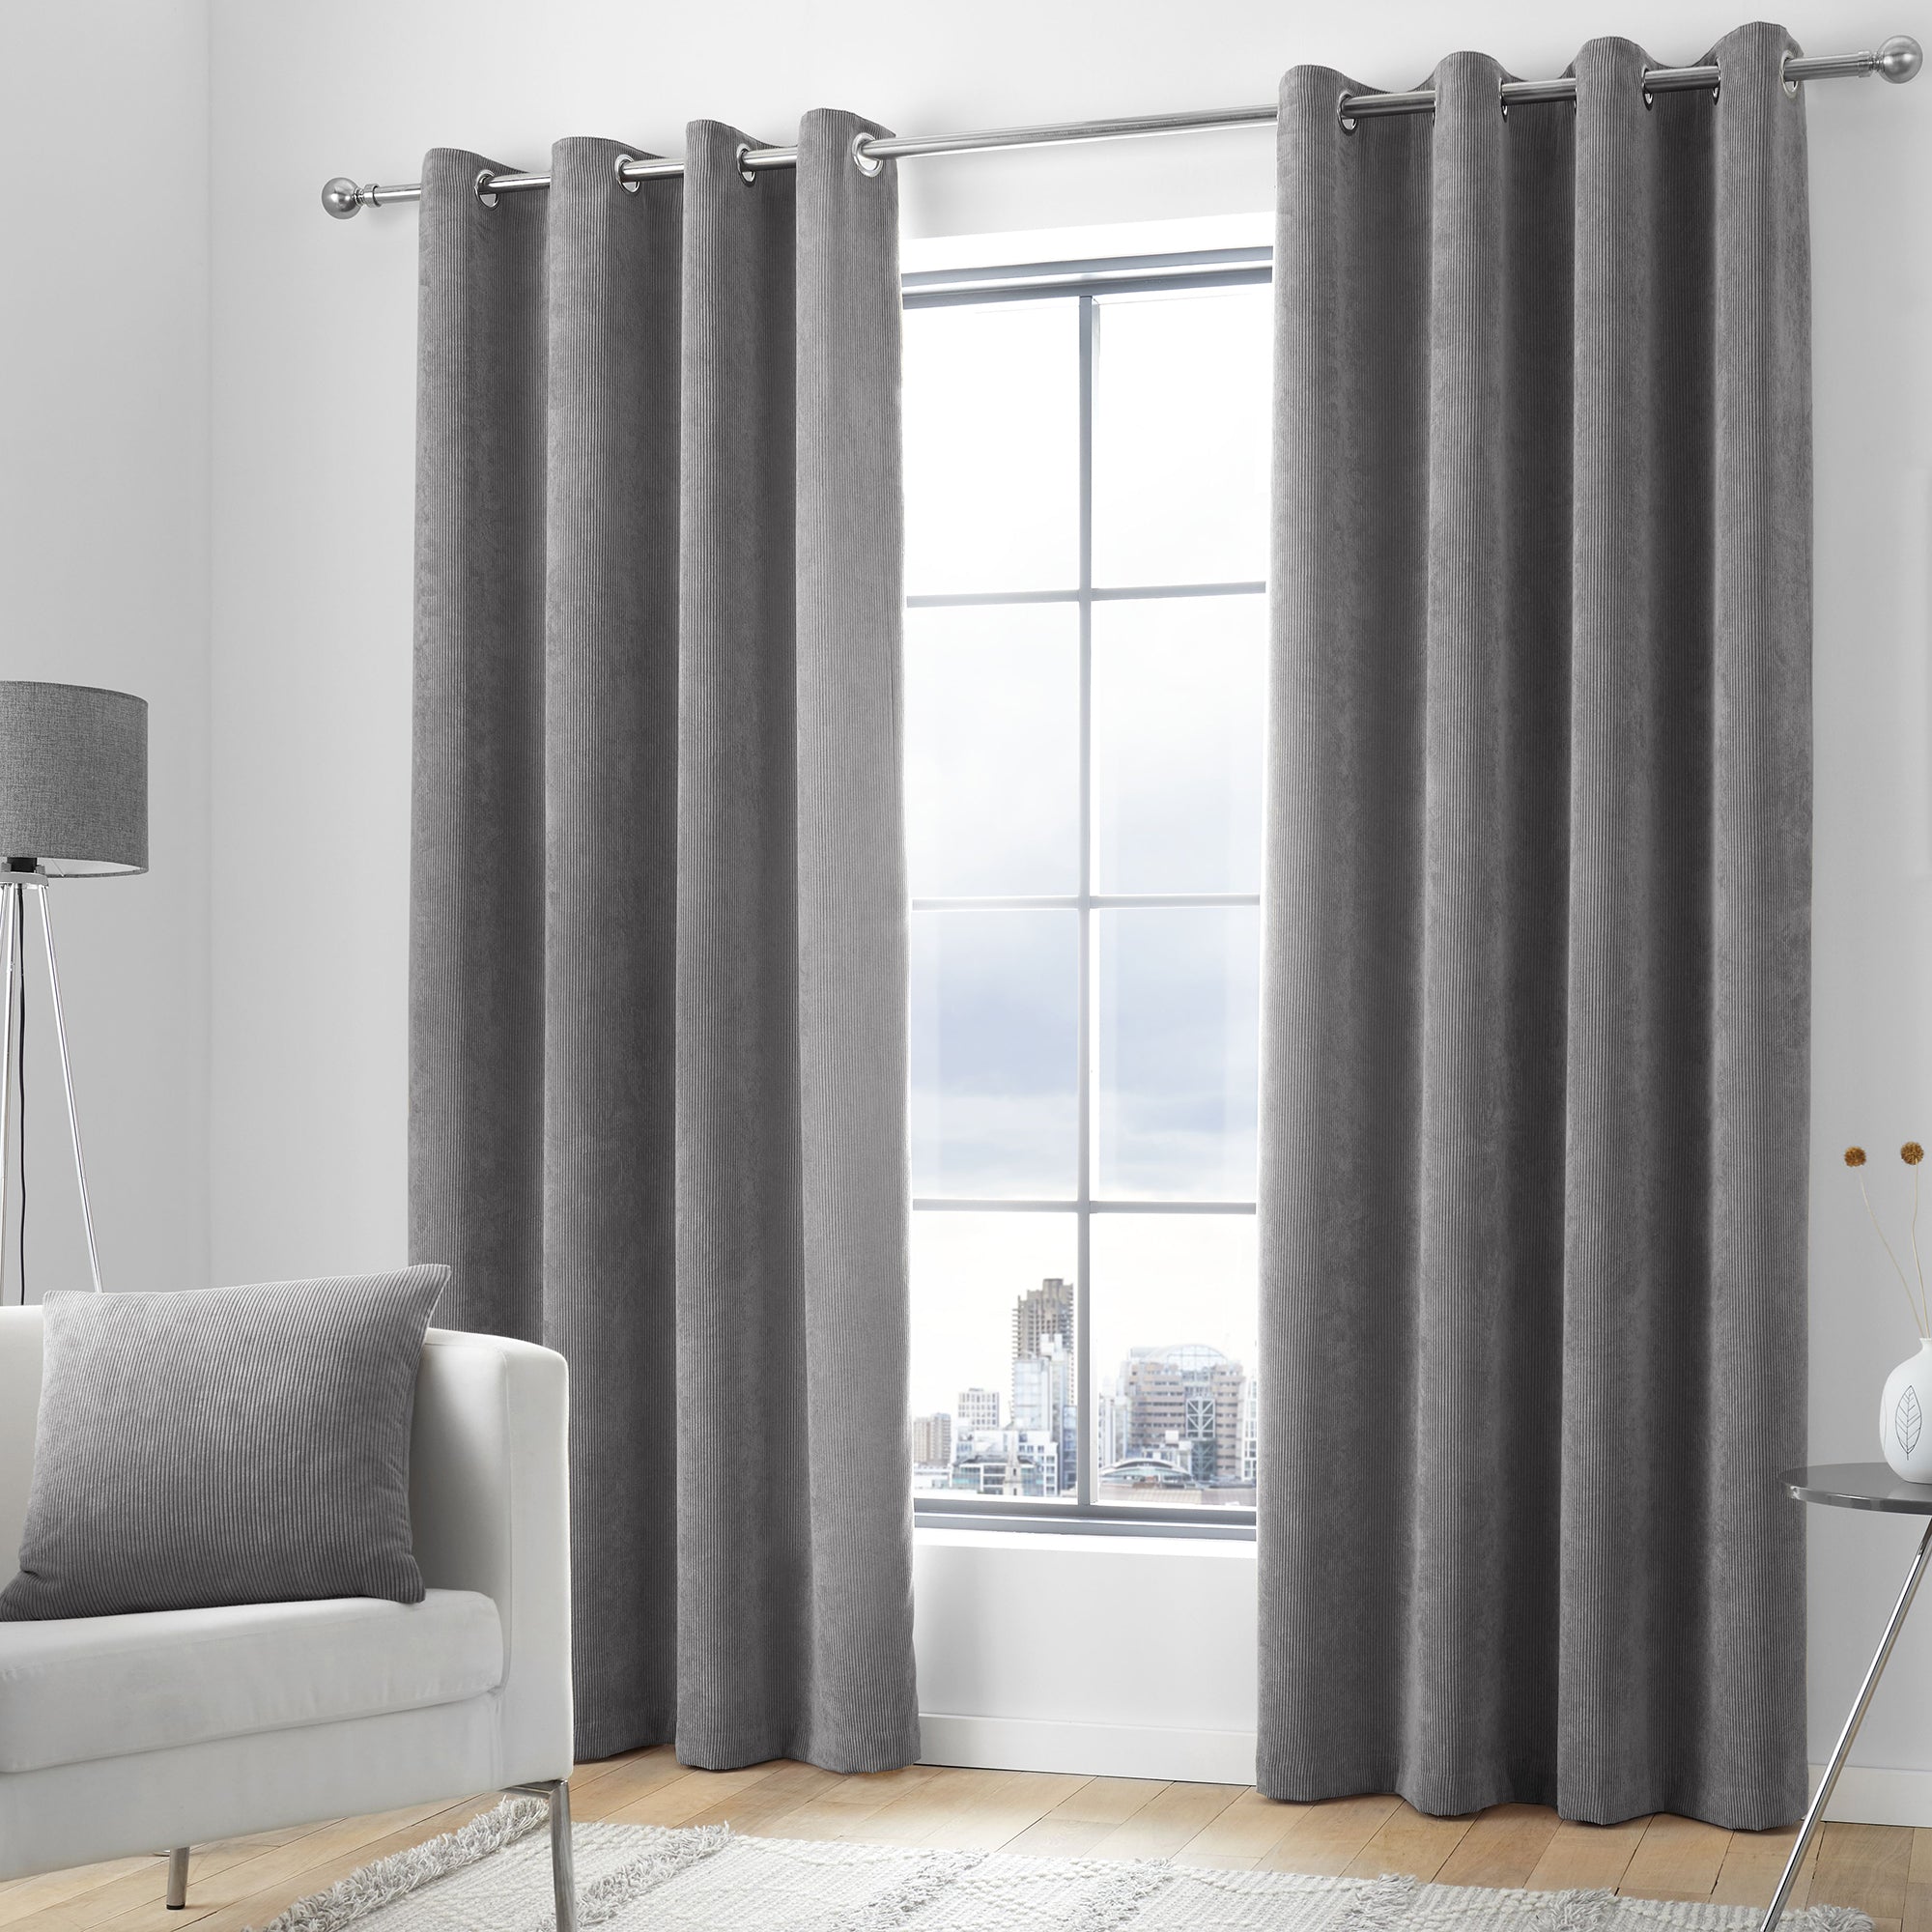 Kilbride Cord - Chenille Eyelet Curtains in Charcoal- By Appletree Loft